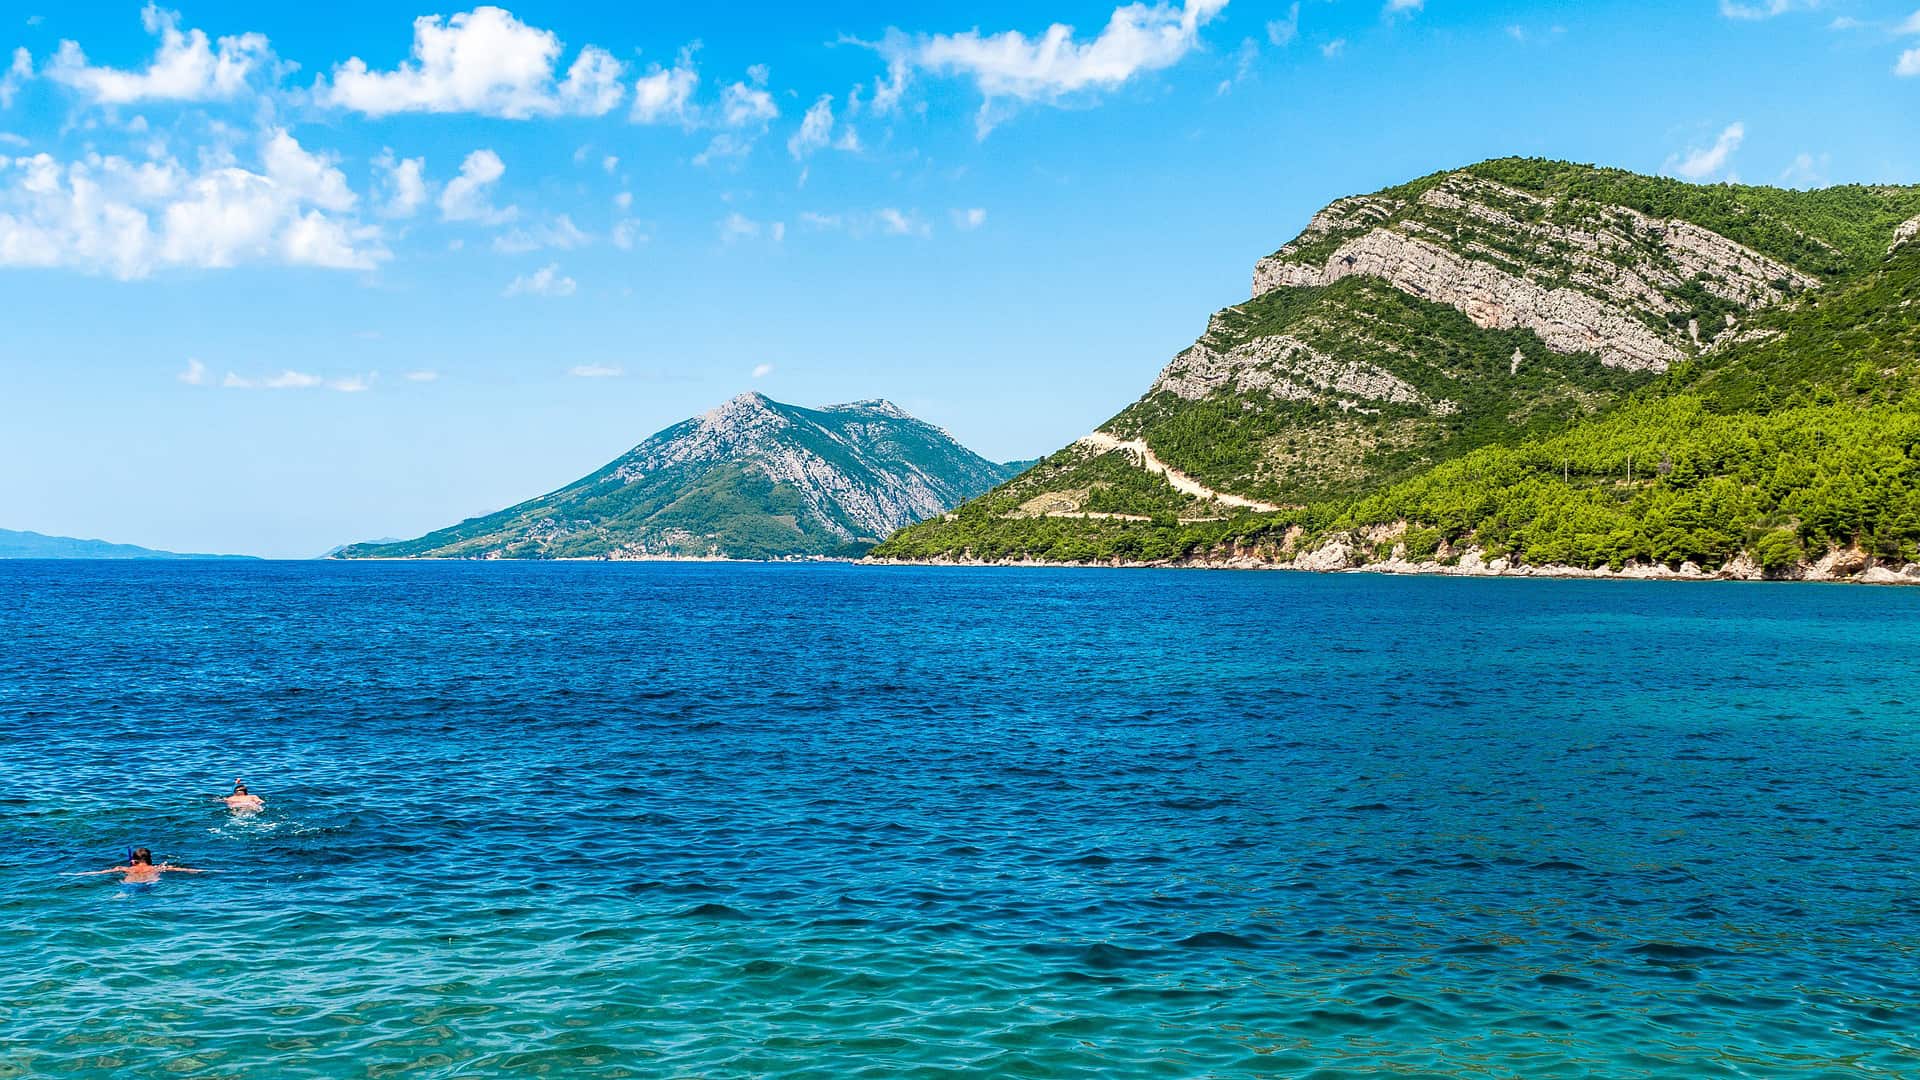 Two people swim in the clear blue waters near a green mountainous shoreline under a bright blue sky with scattered clouds, enjoying one of Dubrovnik's private boat tours.